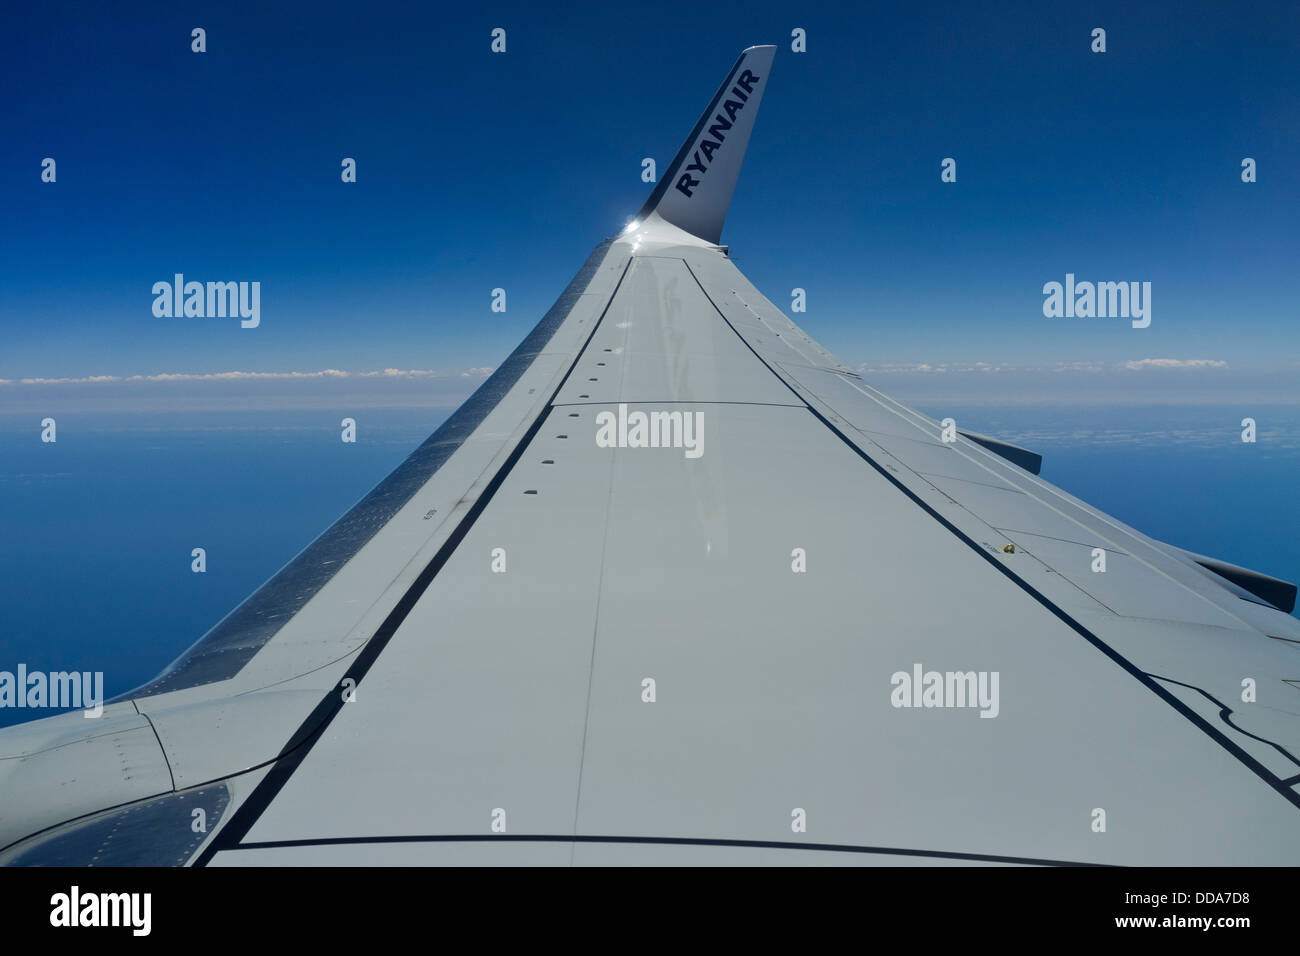 Wing of a ryanair airbus 320 seen against a deep blue sky. Stock Photo